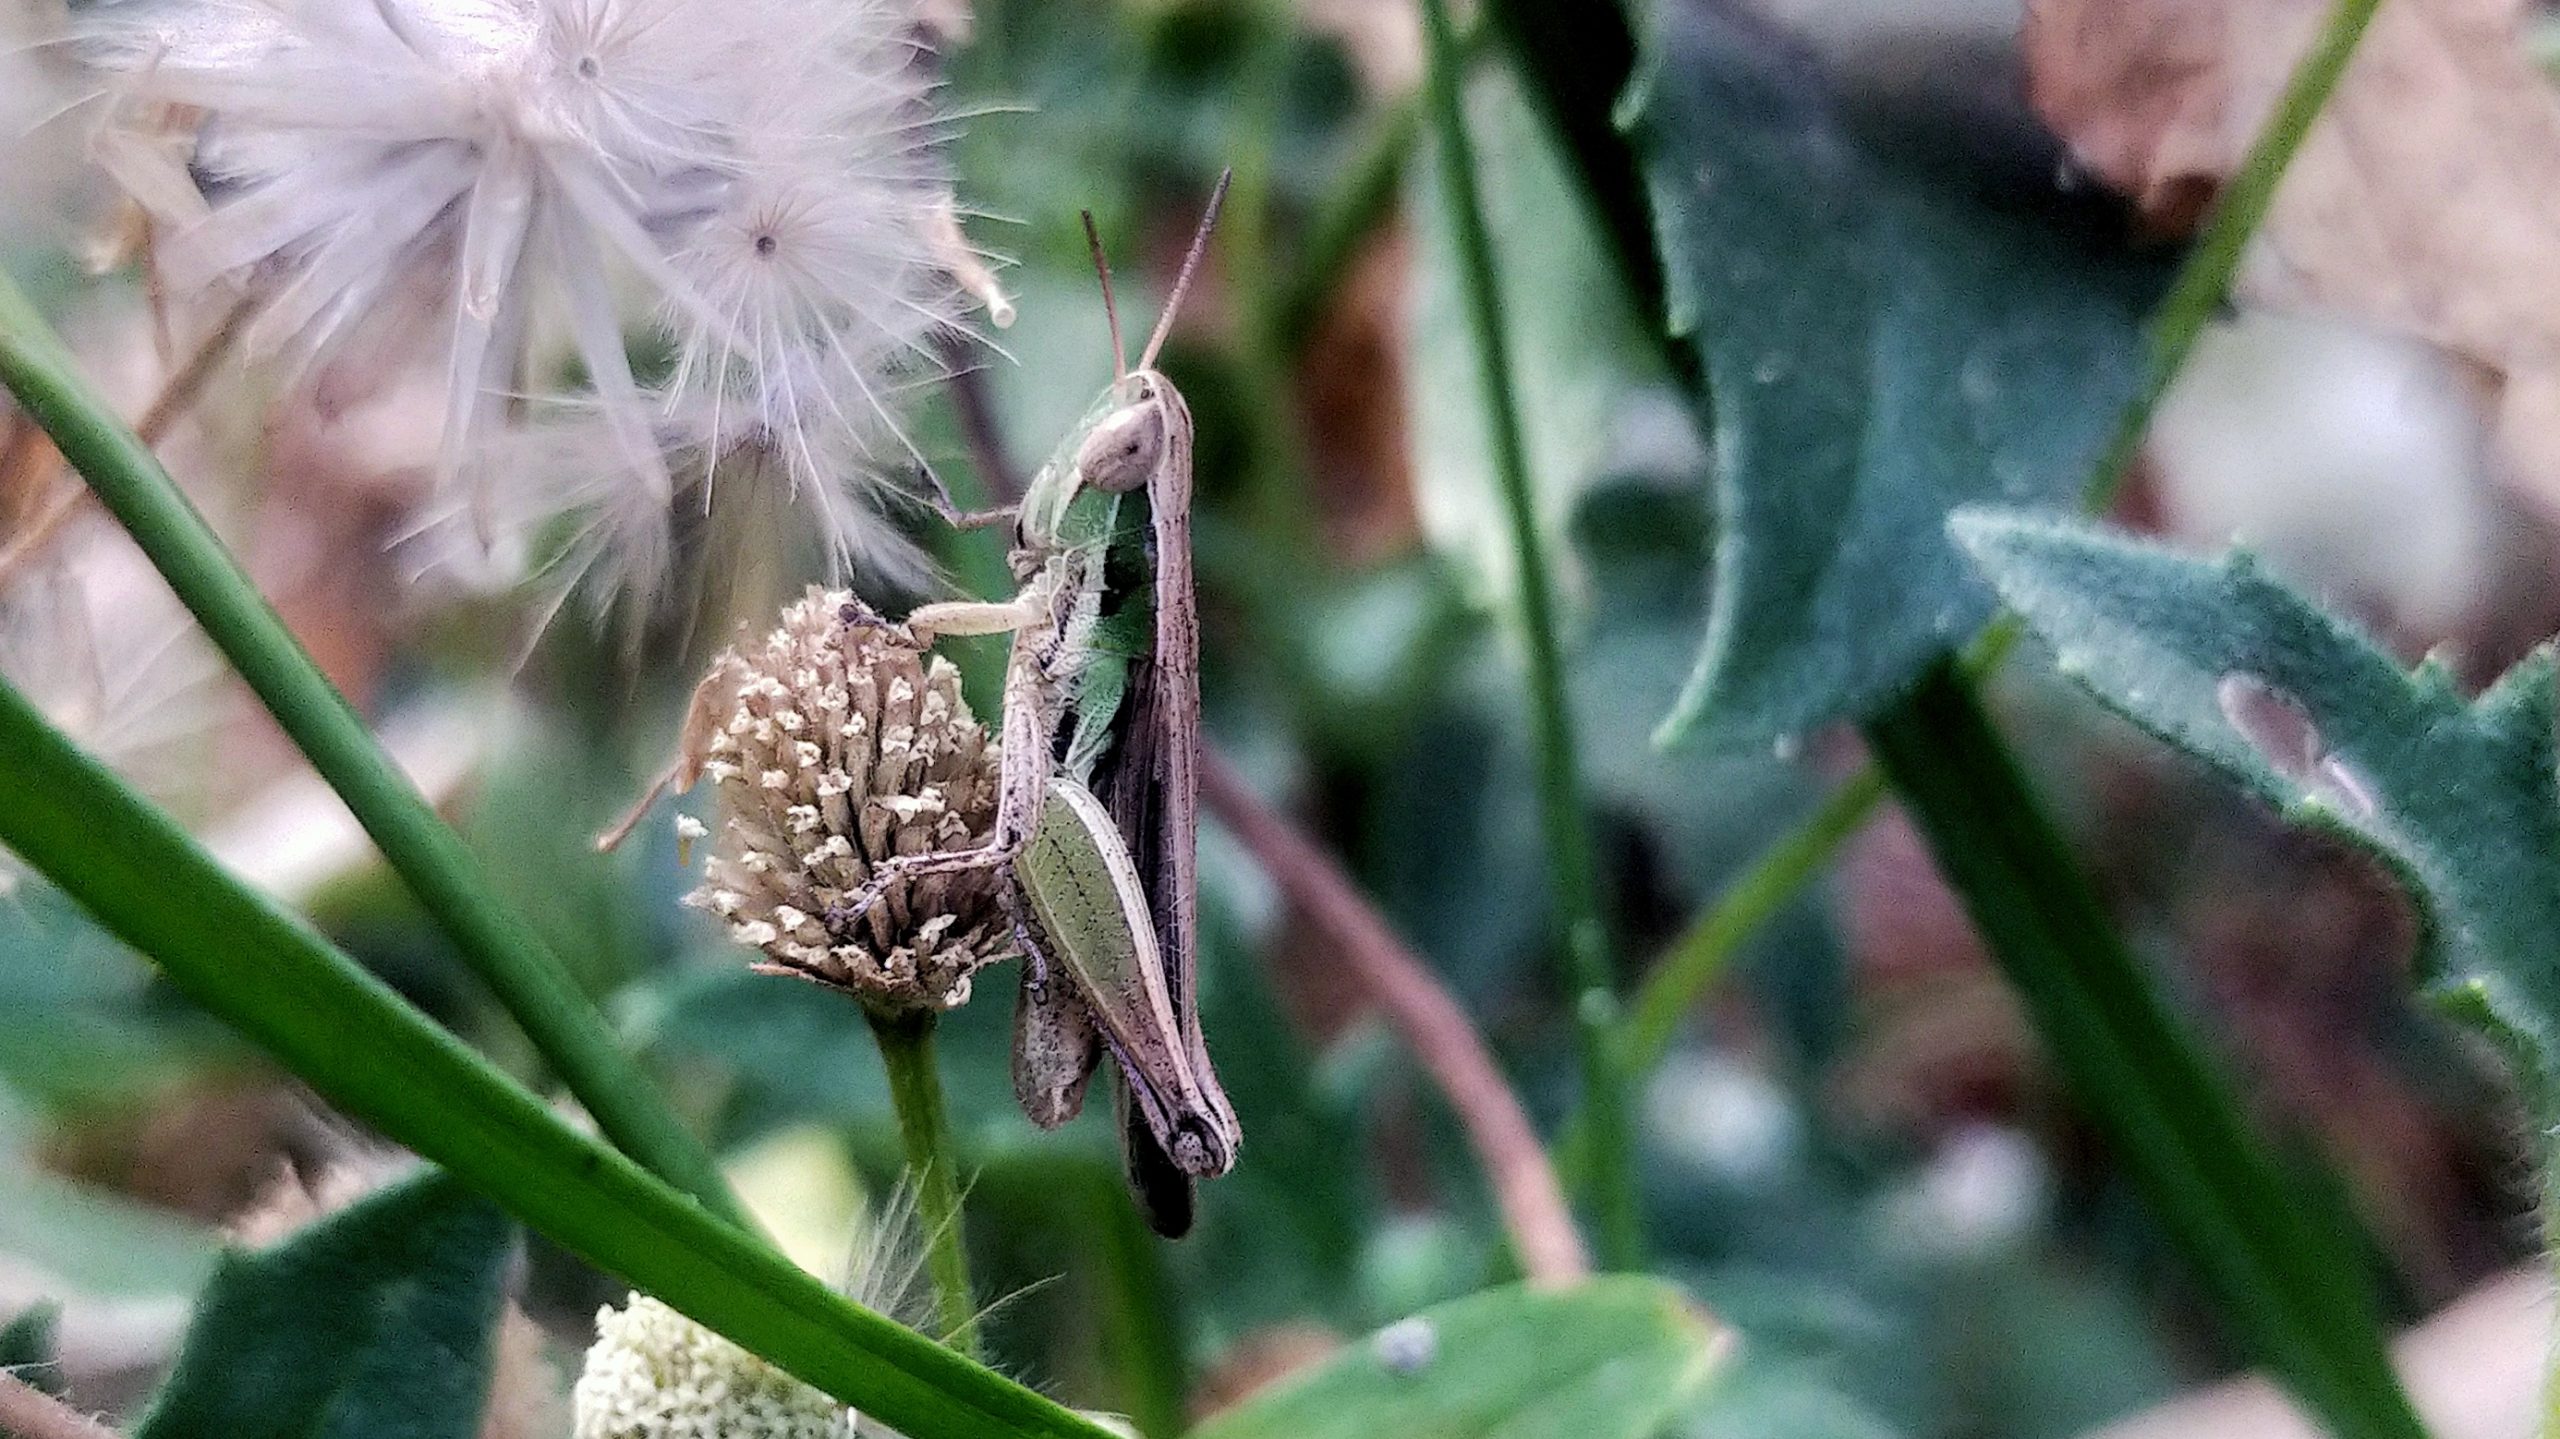 An insect on the plant stem